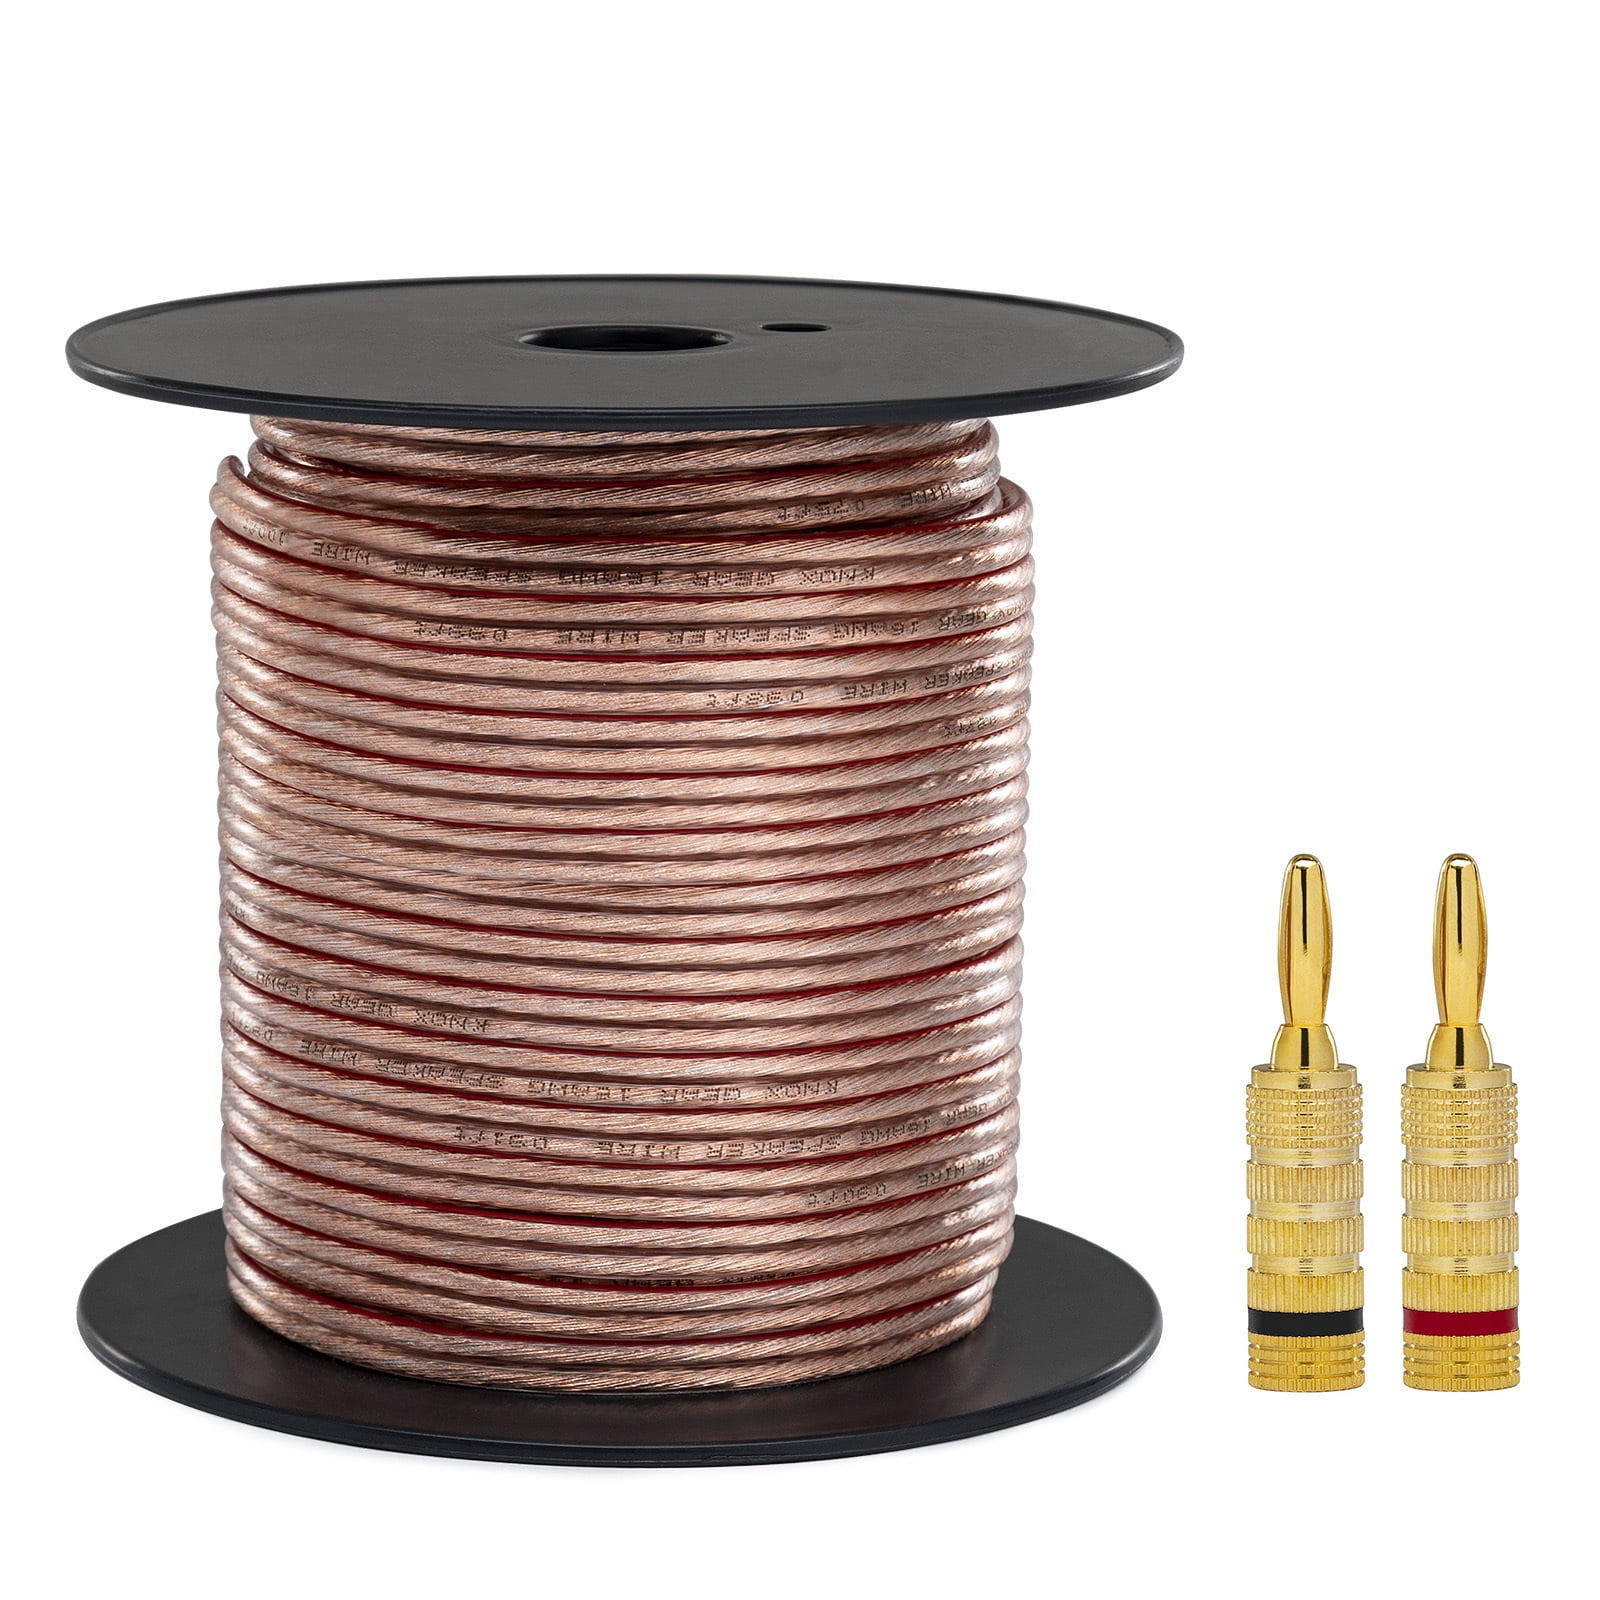 GearIT 12AWG Speaker Cable Wire with Gold-Plated Banana Tip Plugs (10 Feet)  In-Wall CL2 Rated, Heavy Duty Braided, 99.9% Oxygen-Free Copper (OFC) -  White, 10ft - Walmart.com